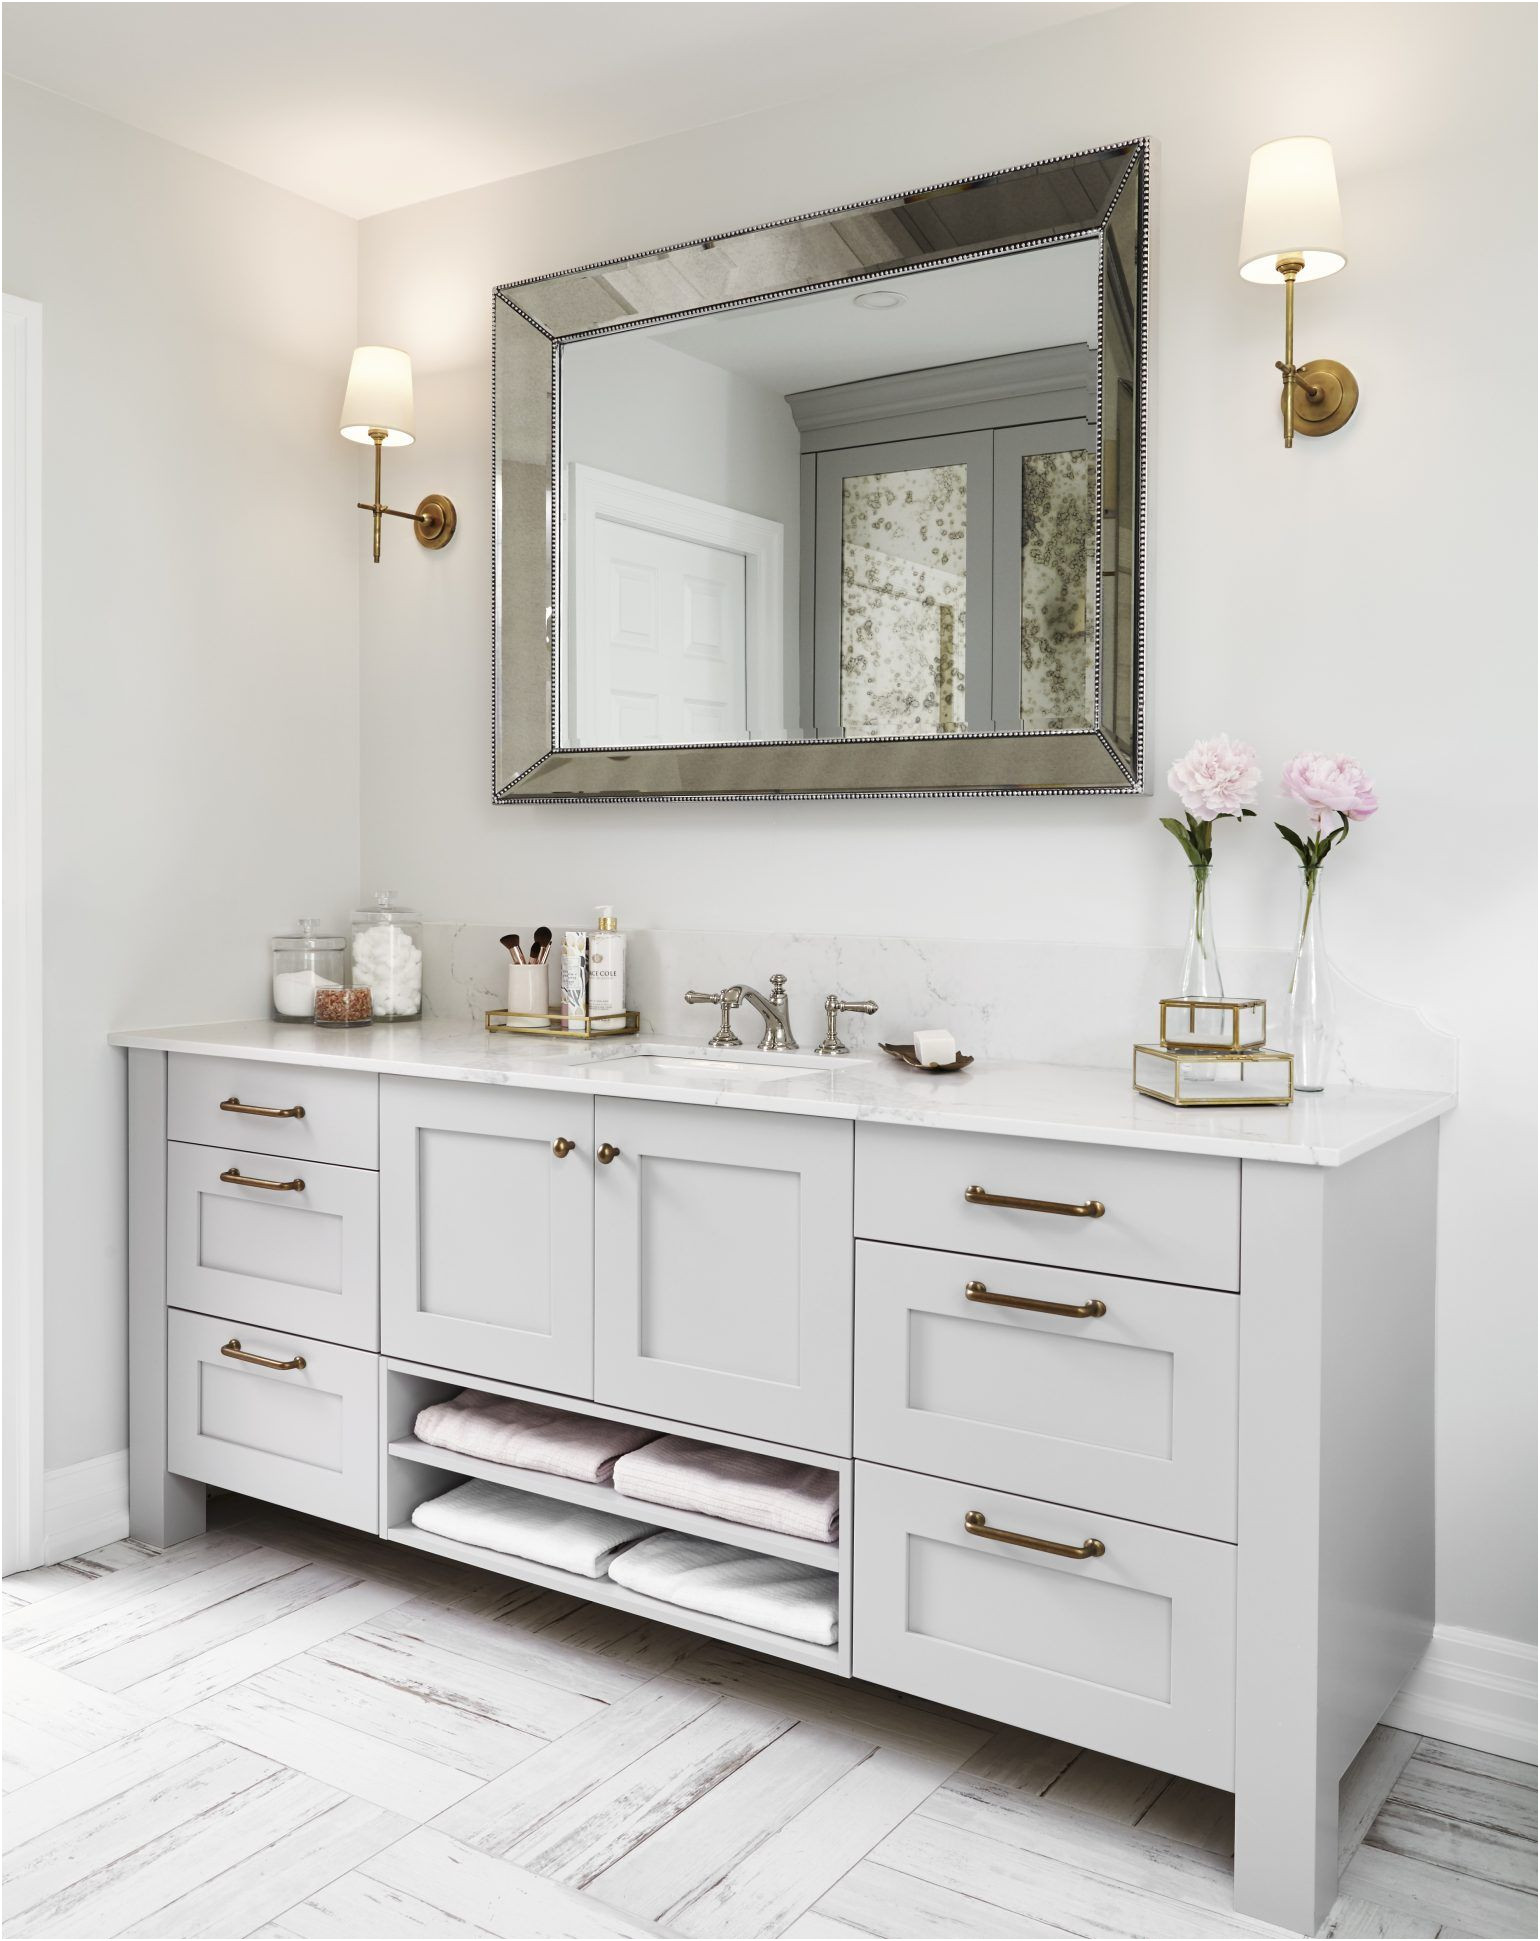 Lovely Made to Measure Bathroom Mirrors